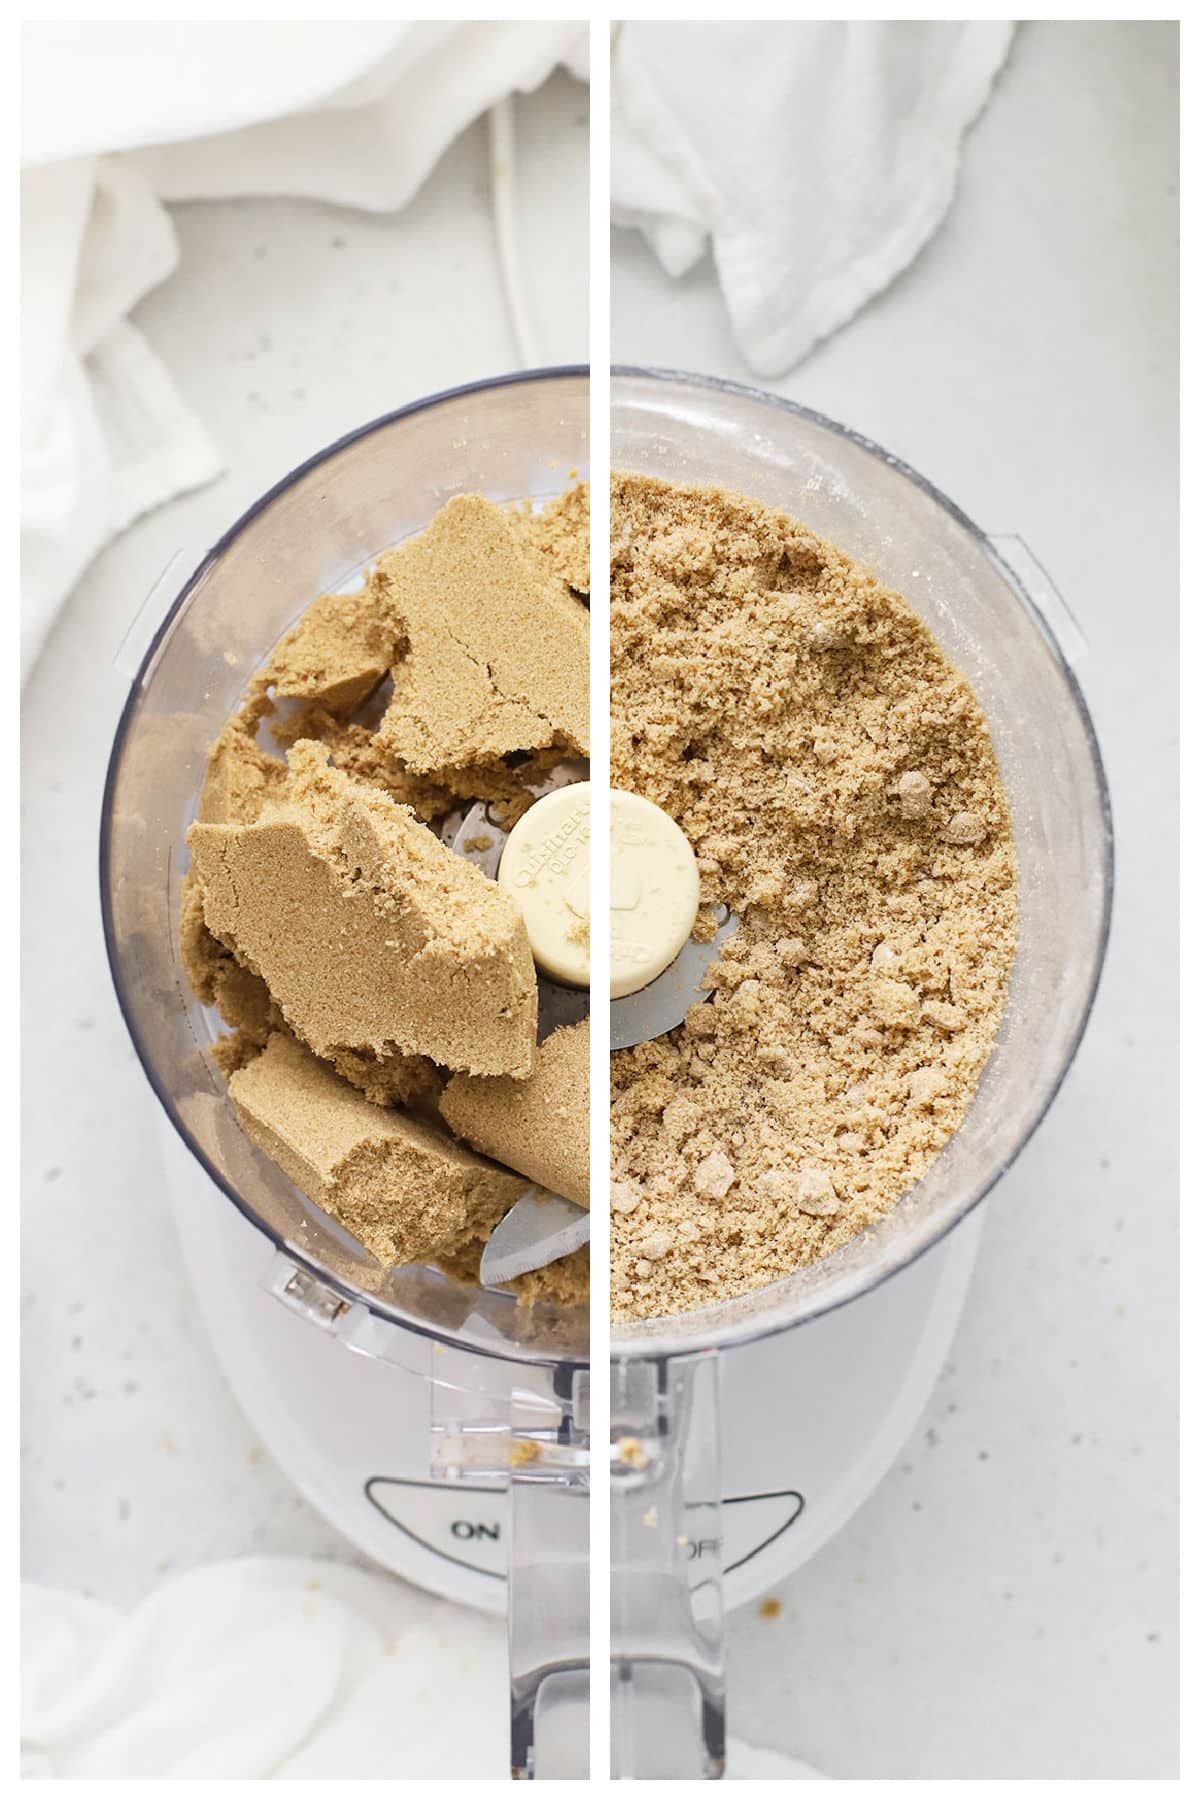 A before and after comparison of softening brown sugar with a food processor